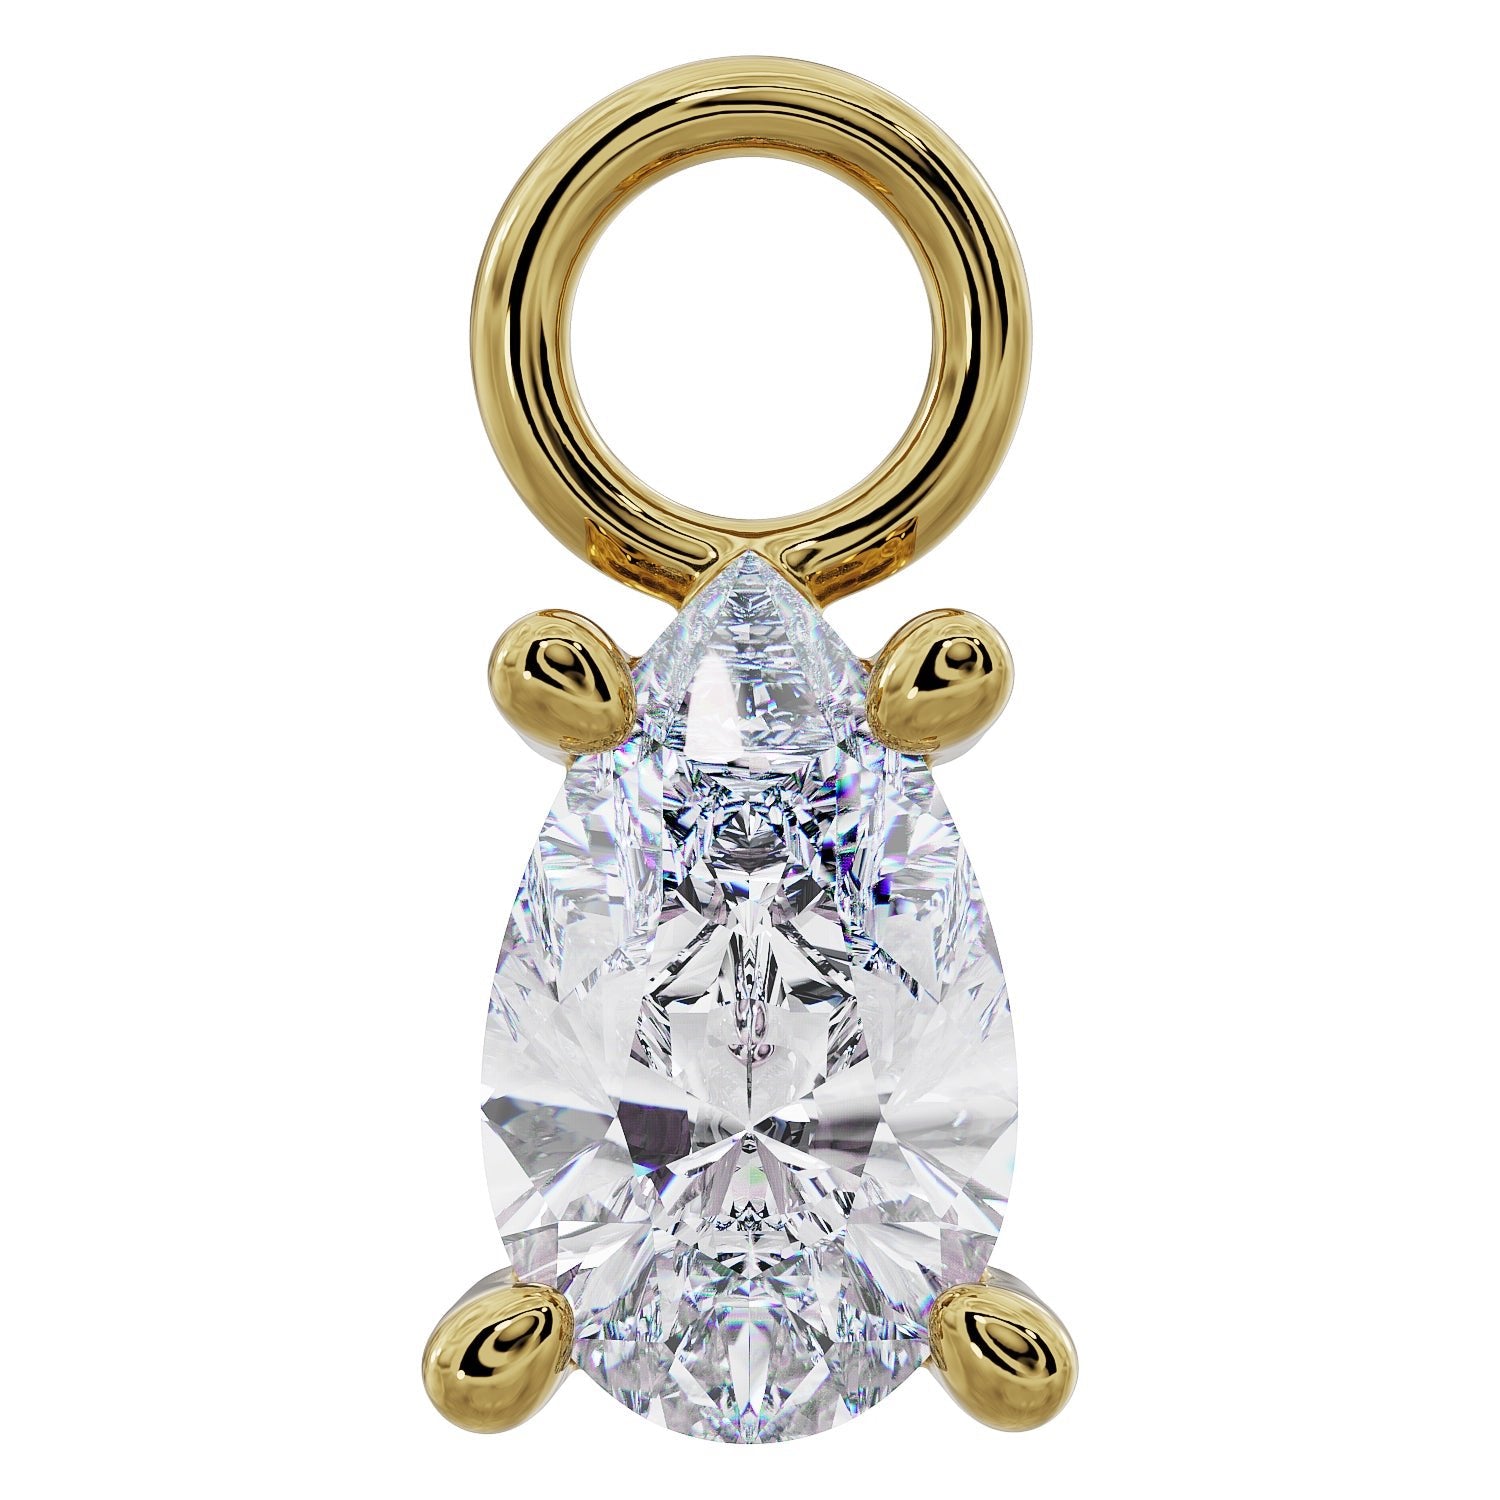 Pear Drop Diamond or CZ Charm Accessory for Piercing Jewelry-Cubic Zirconia   14K Yellow Gold